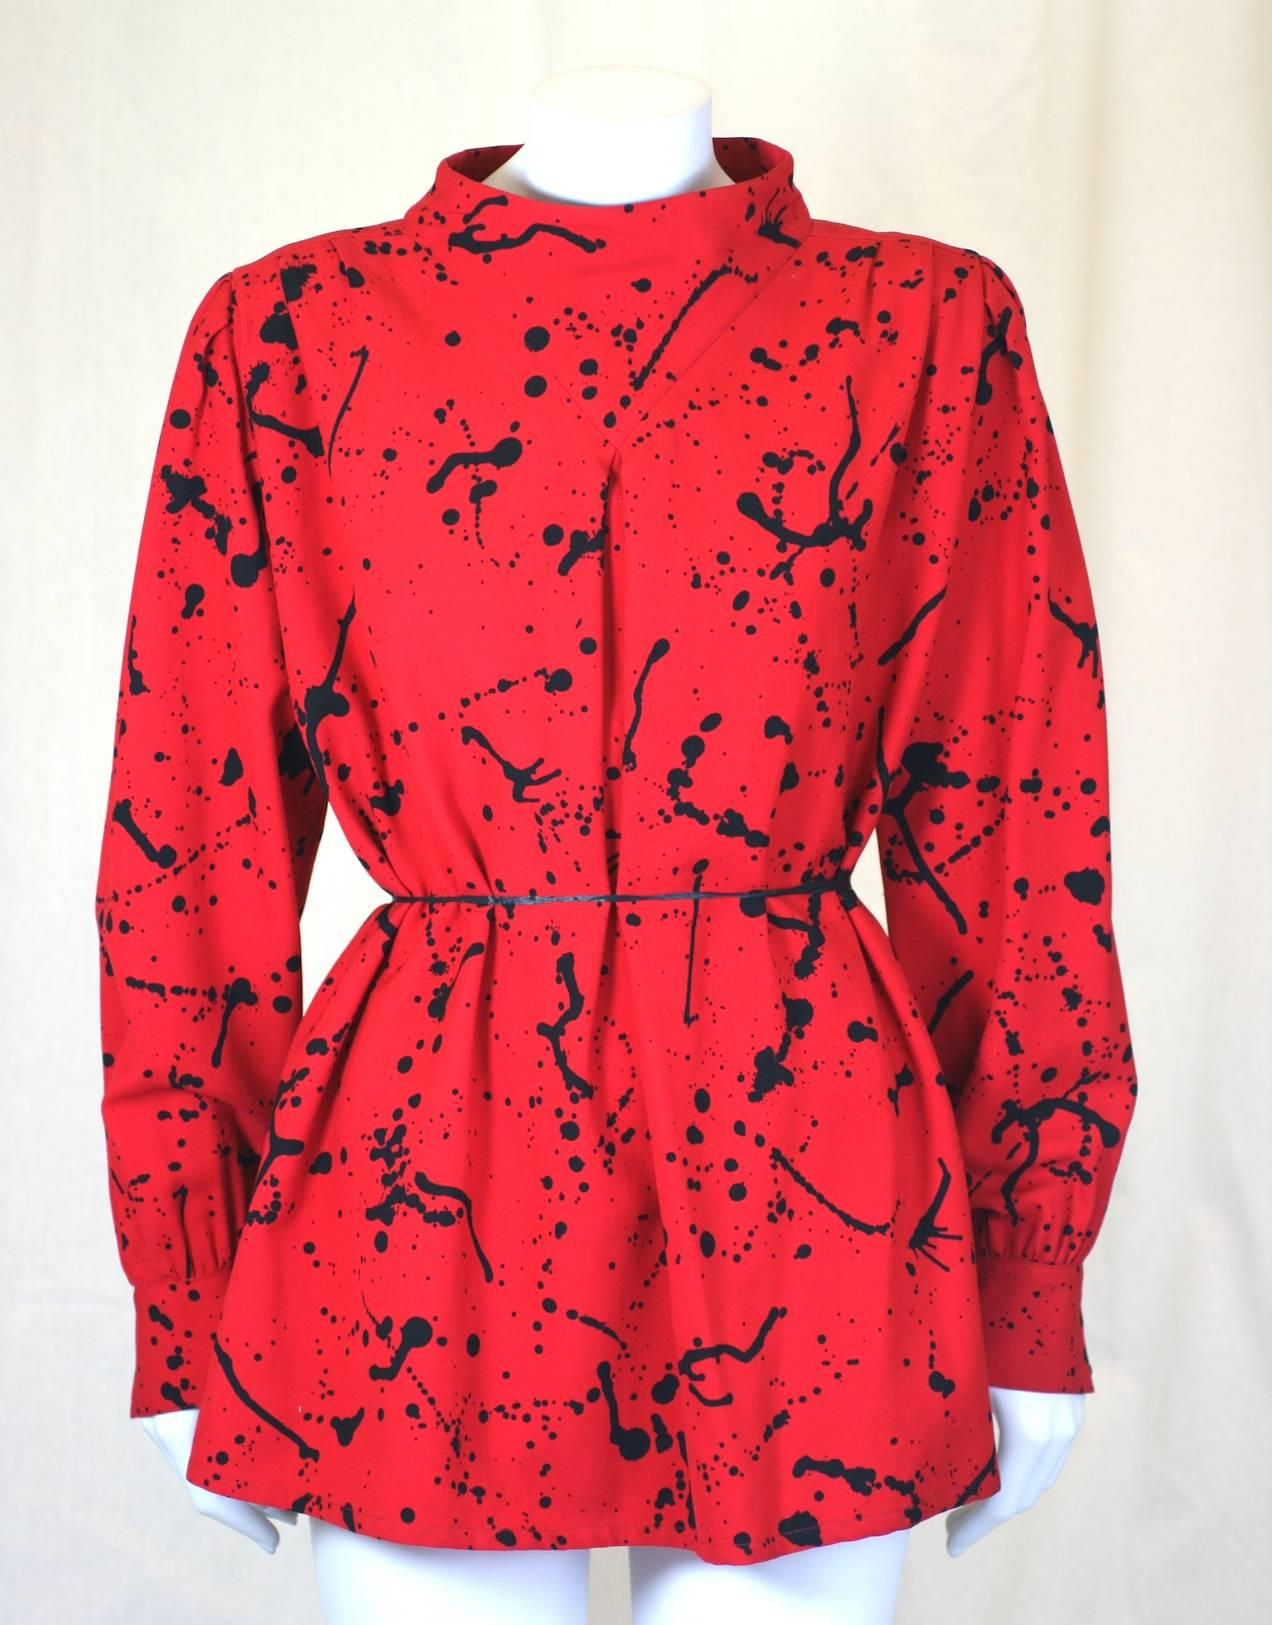 Andre Courreges Splatter Print Wool Shirt In Excellent Condition For Sale In New York, NY